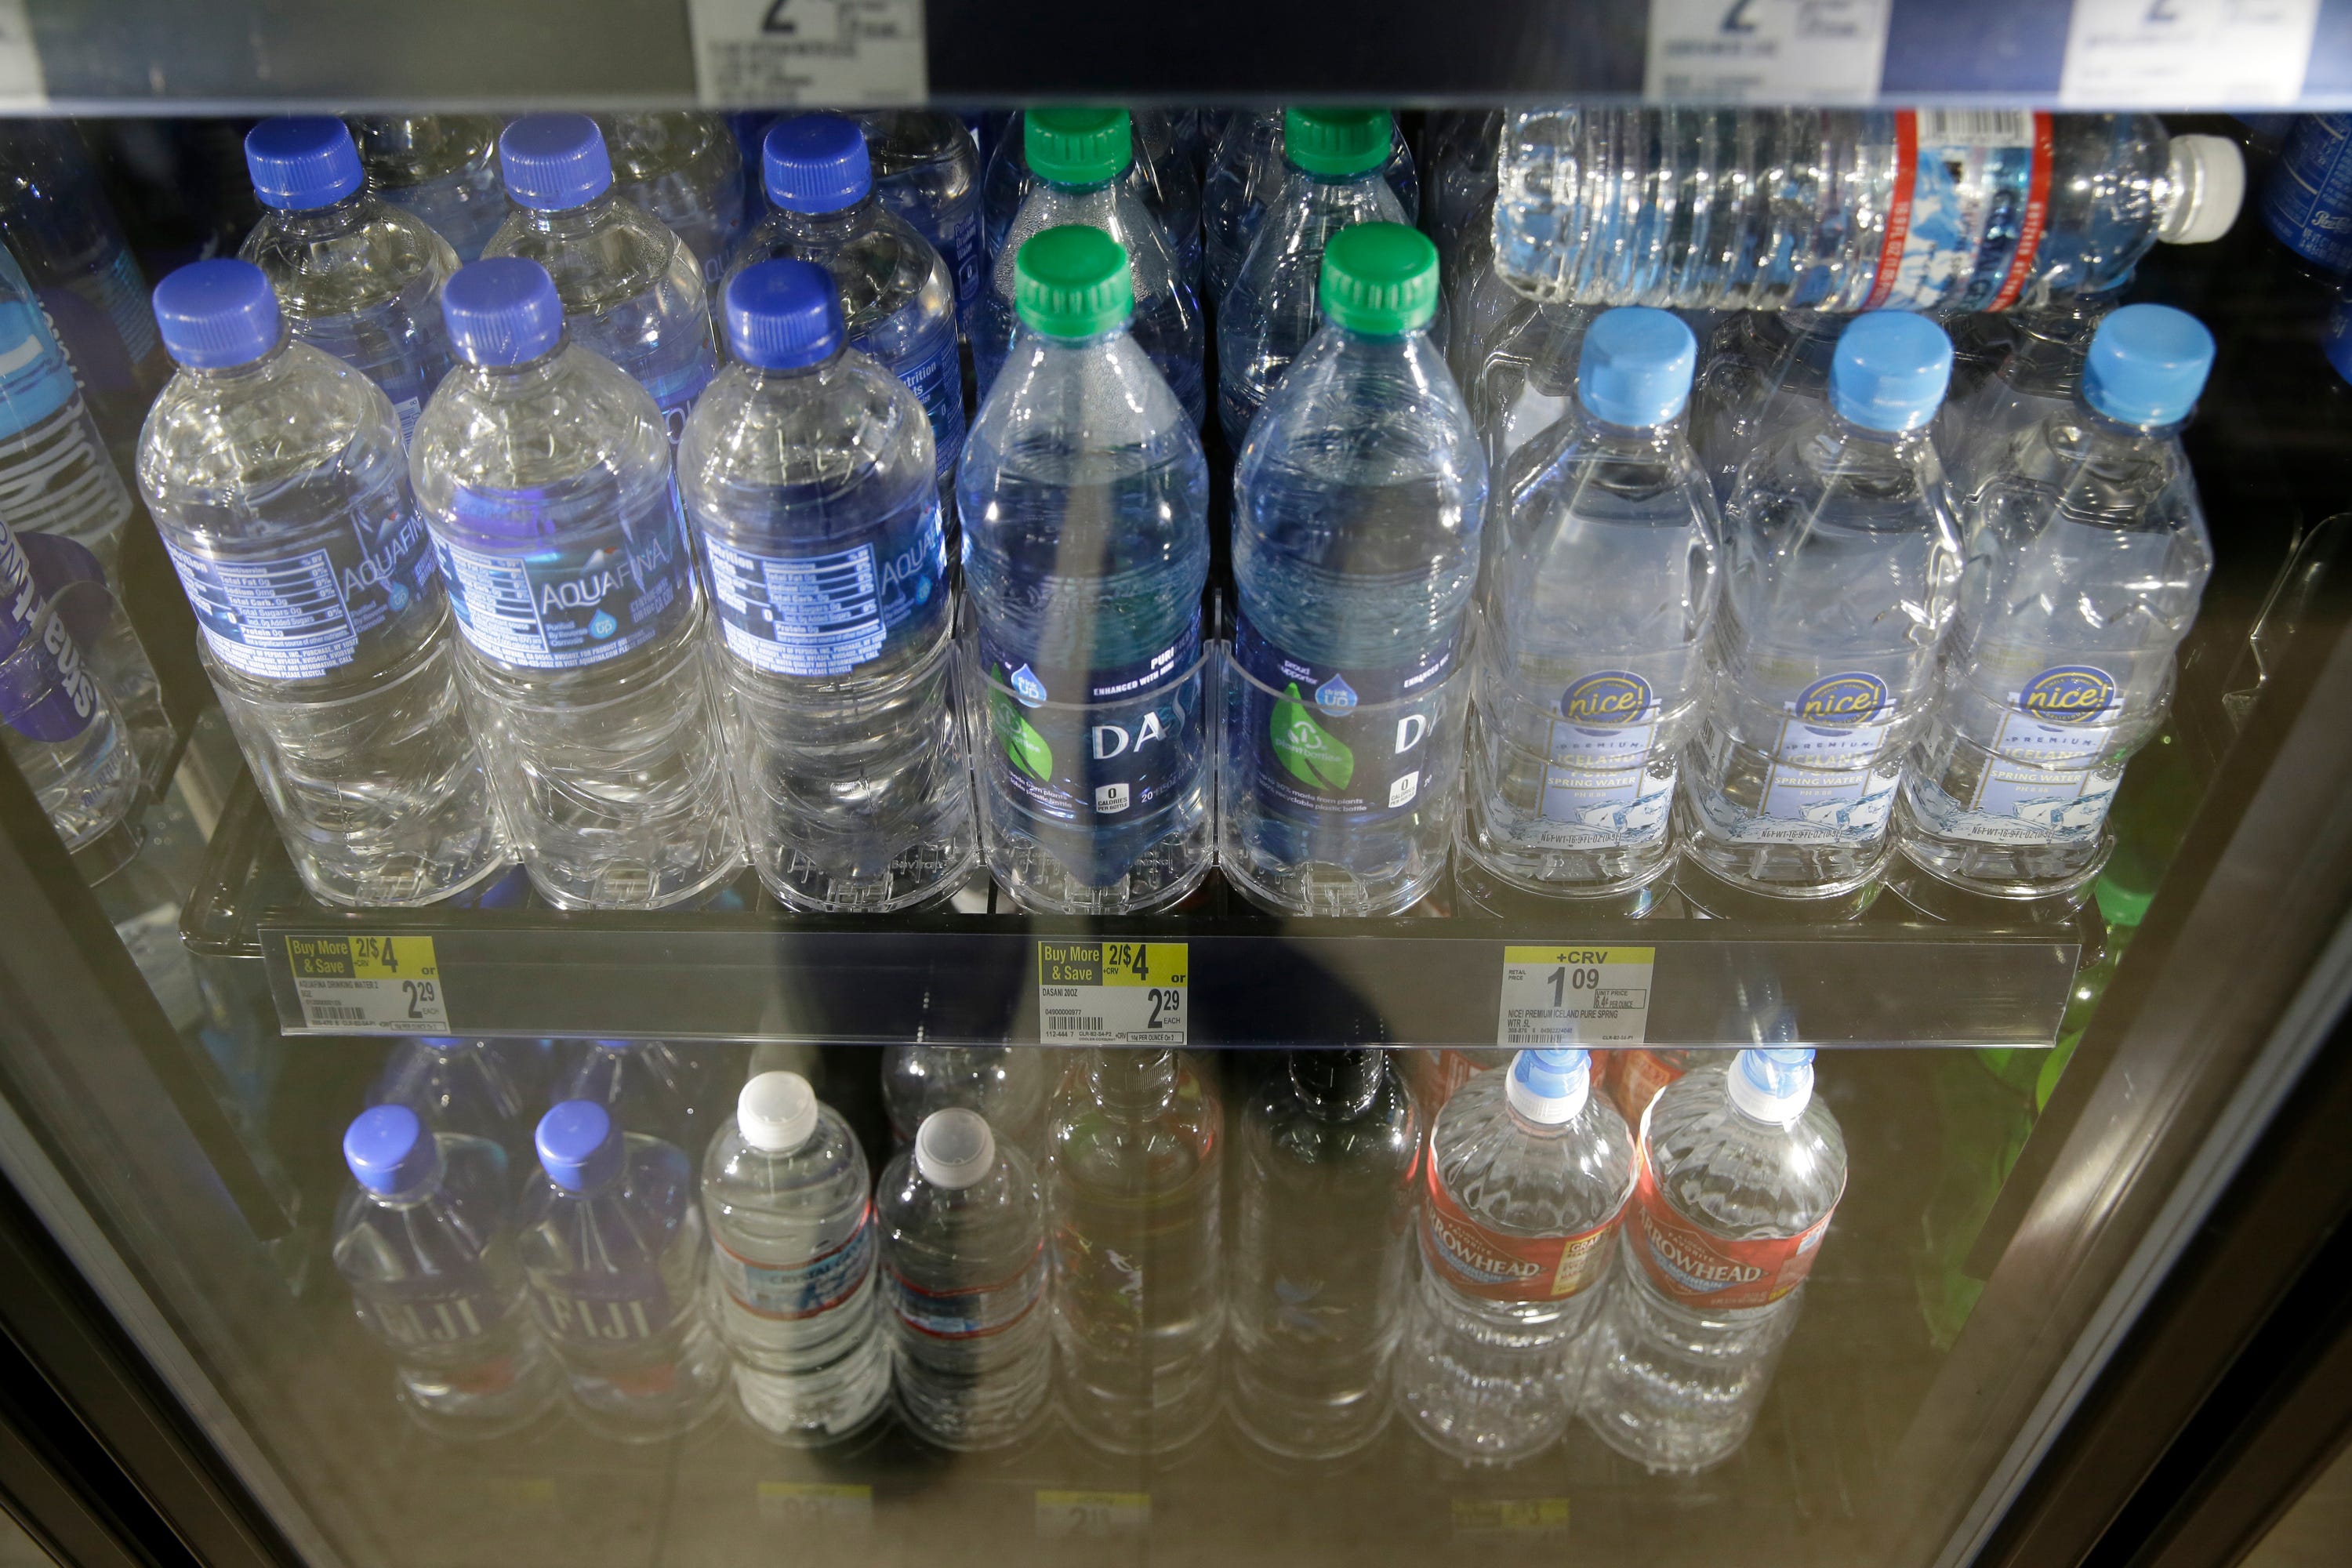 Plastic bottle sales banned at San Francisco airport